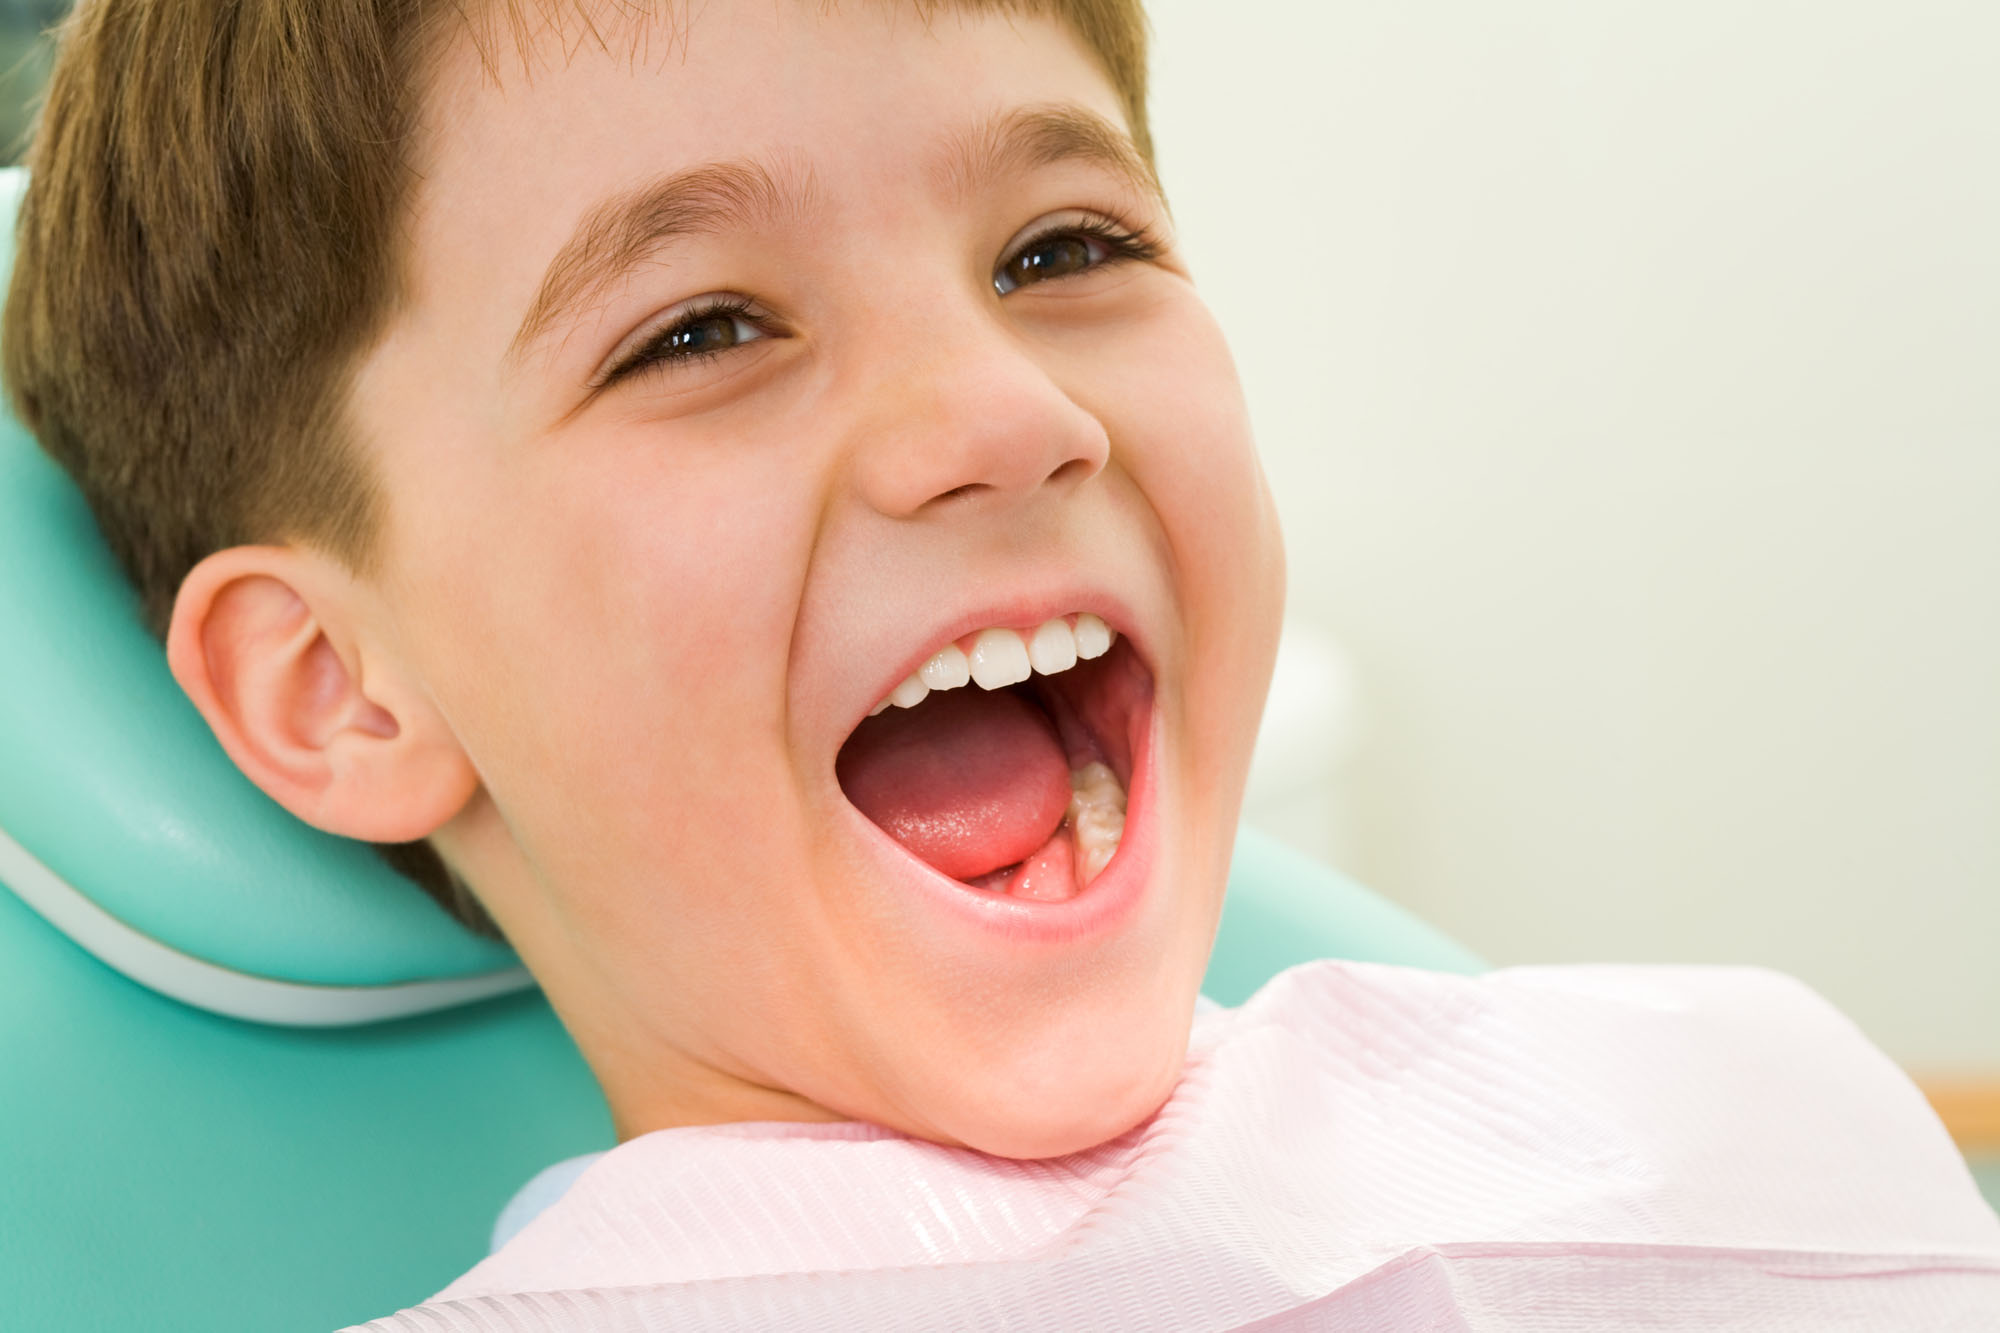 Sealants: A Way to Prevent Childhood Carries